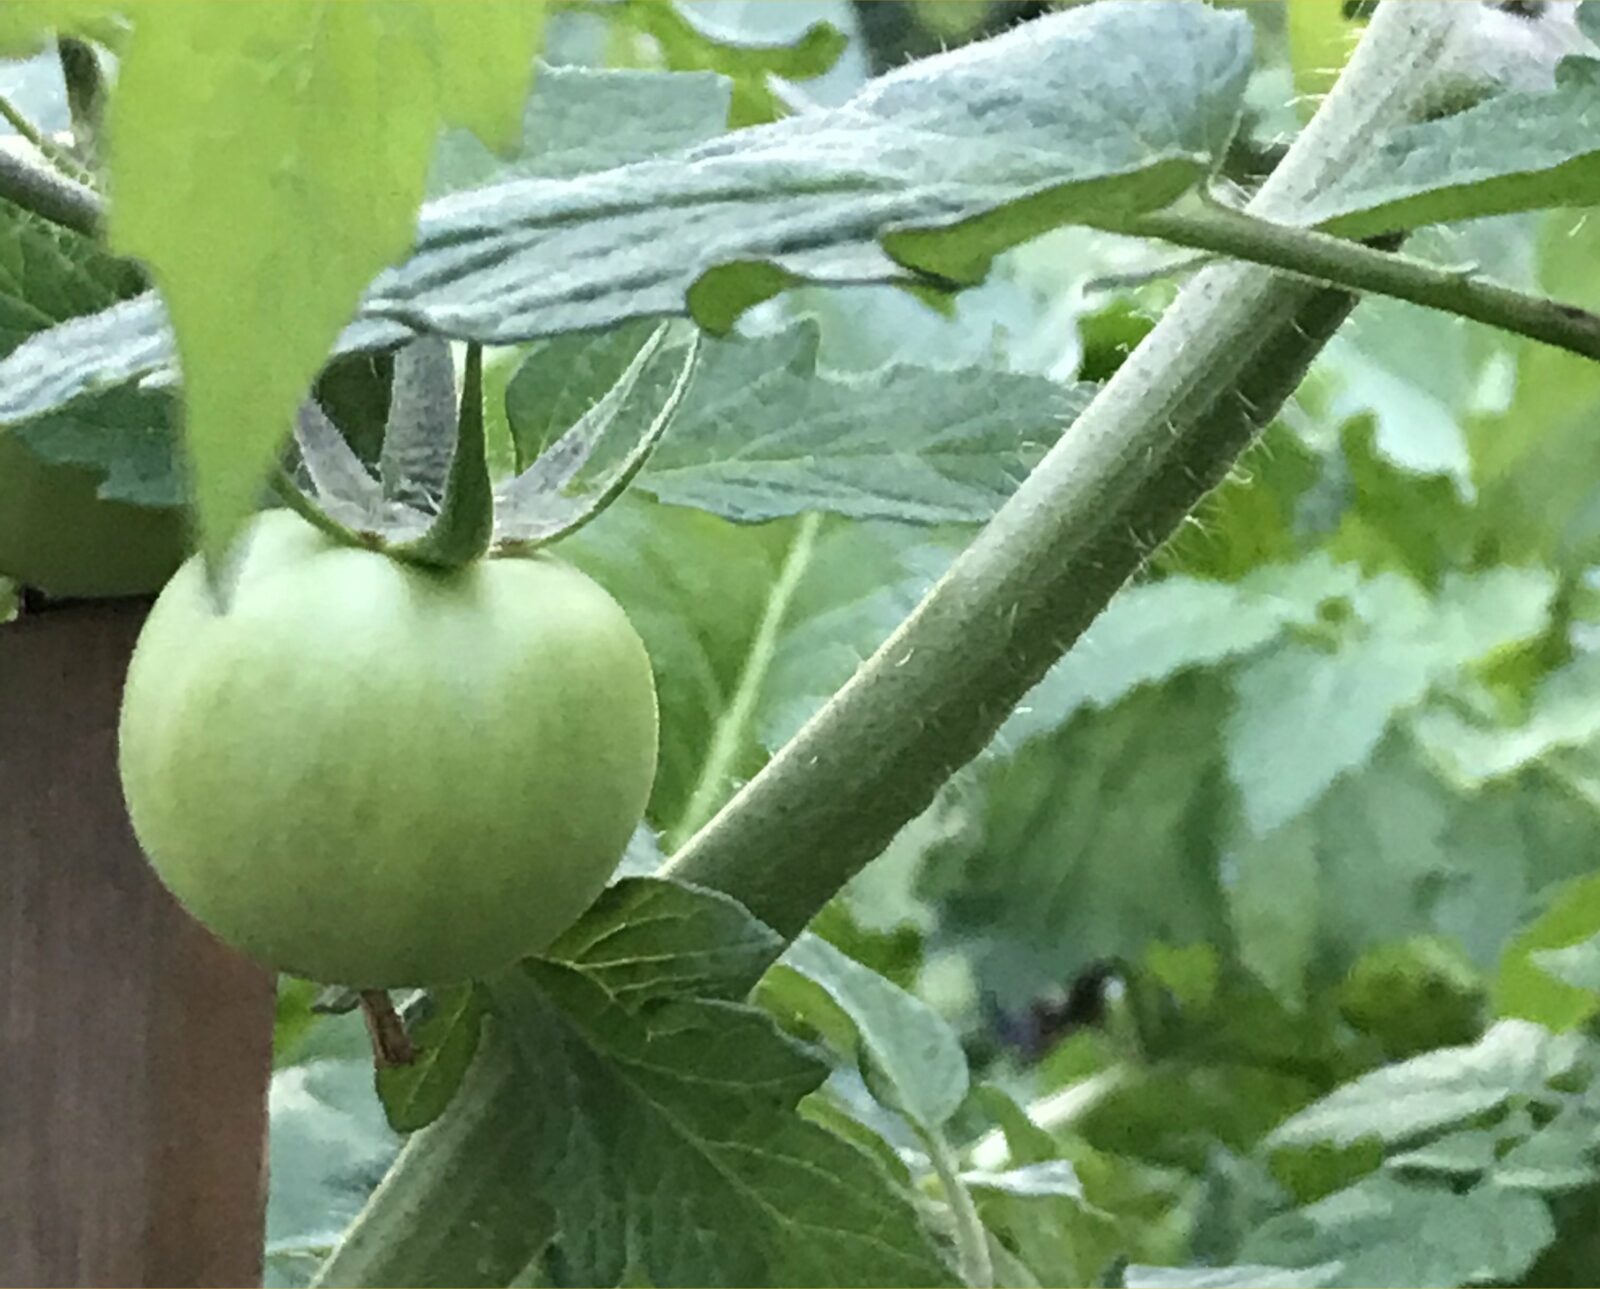 Growing tomatoes in Florida is a labor of love